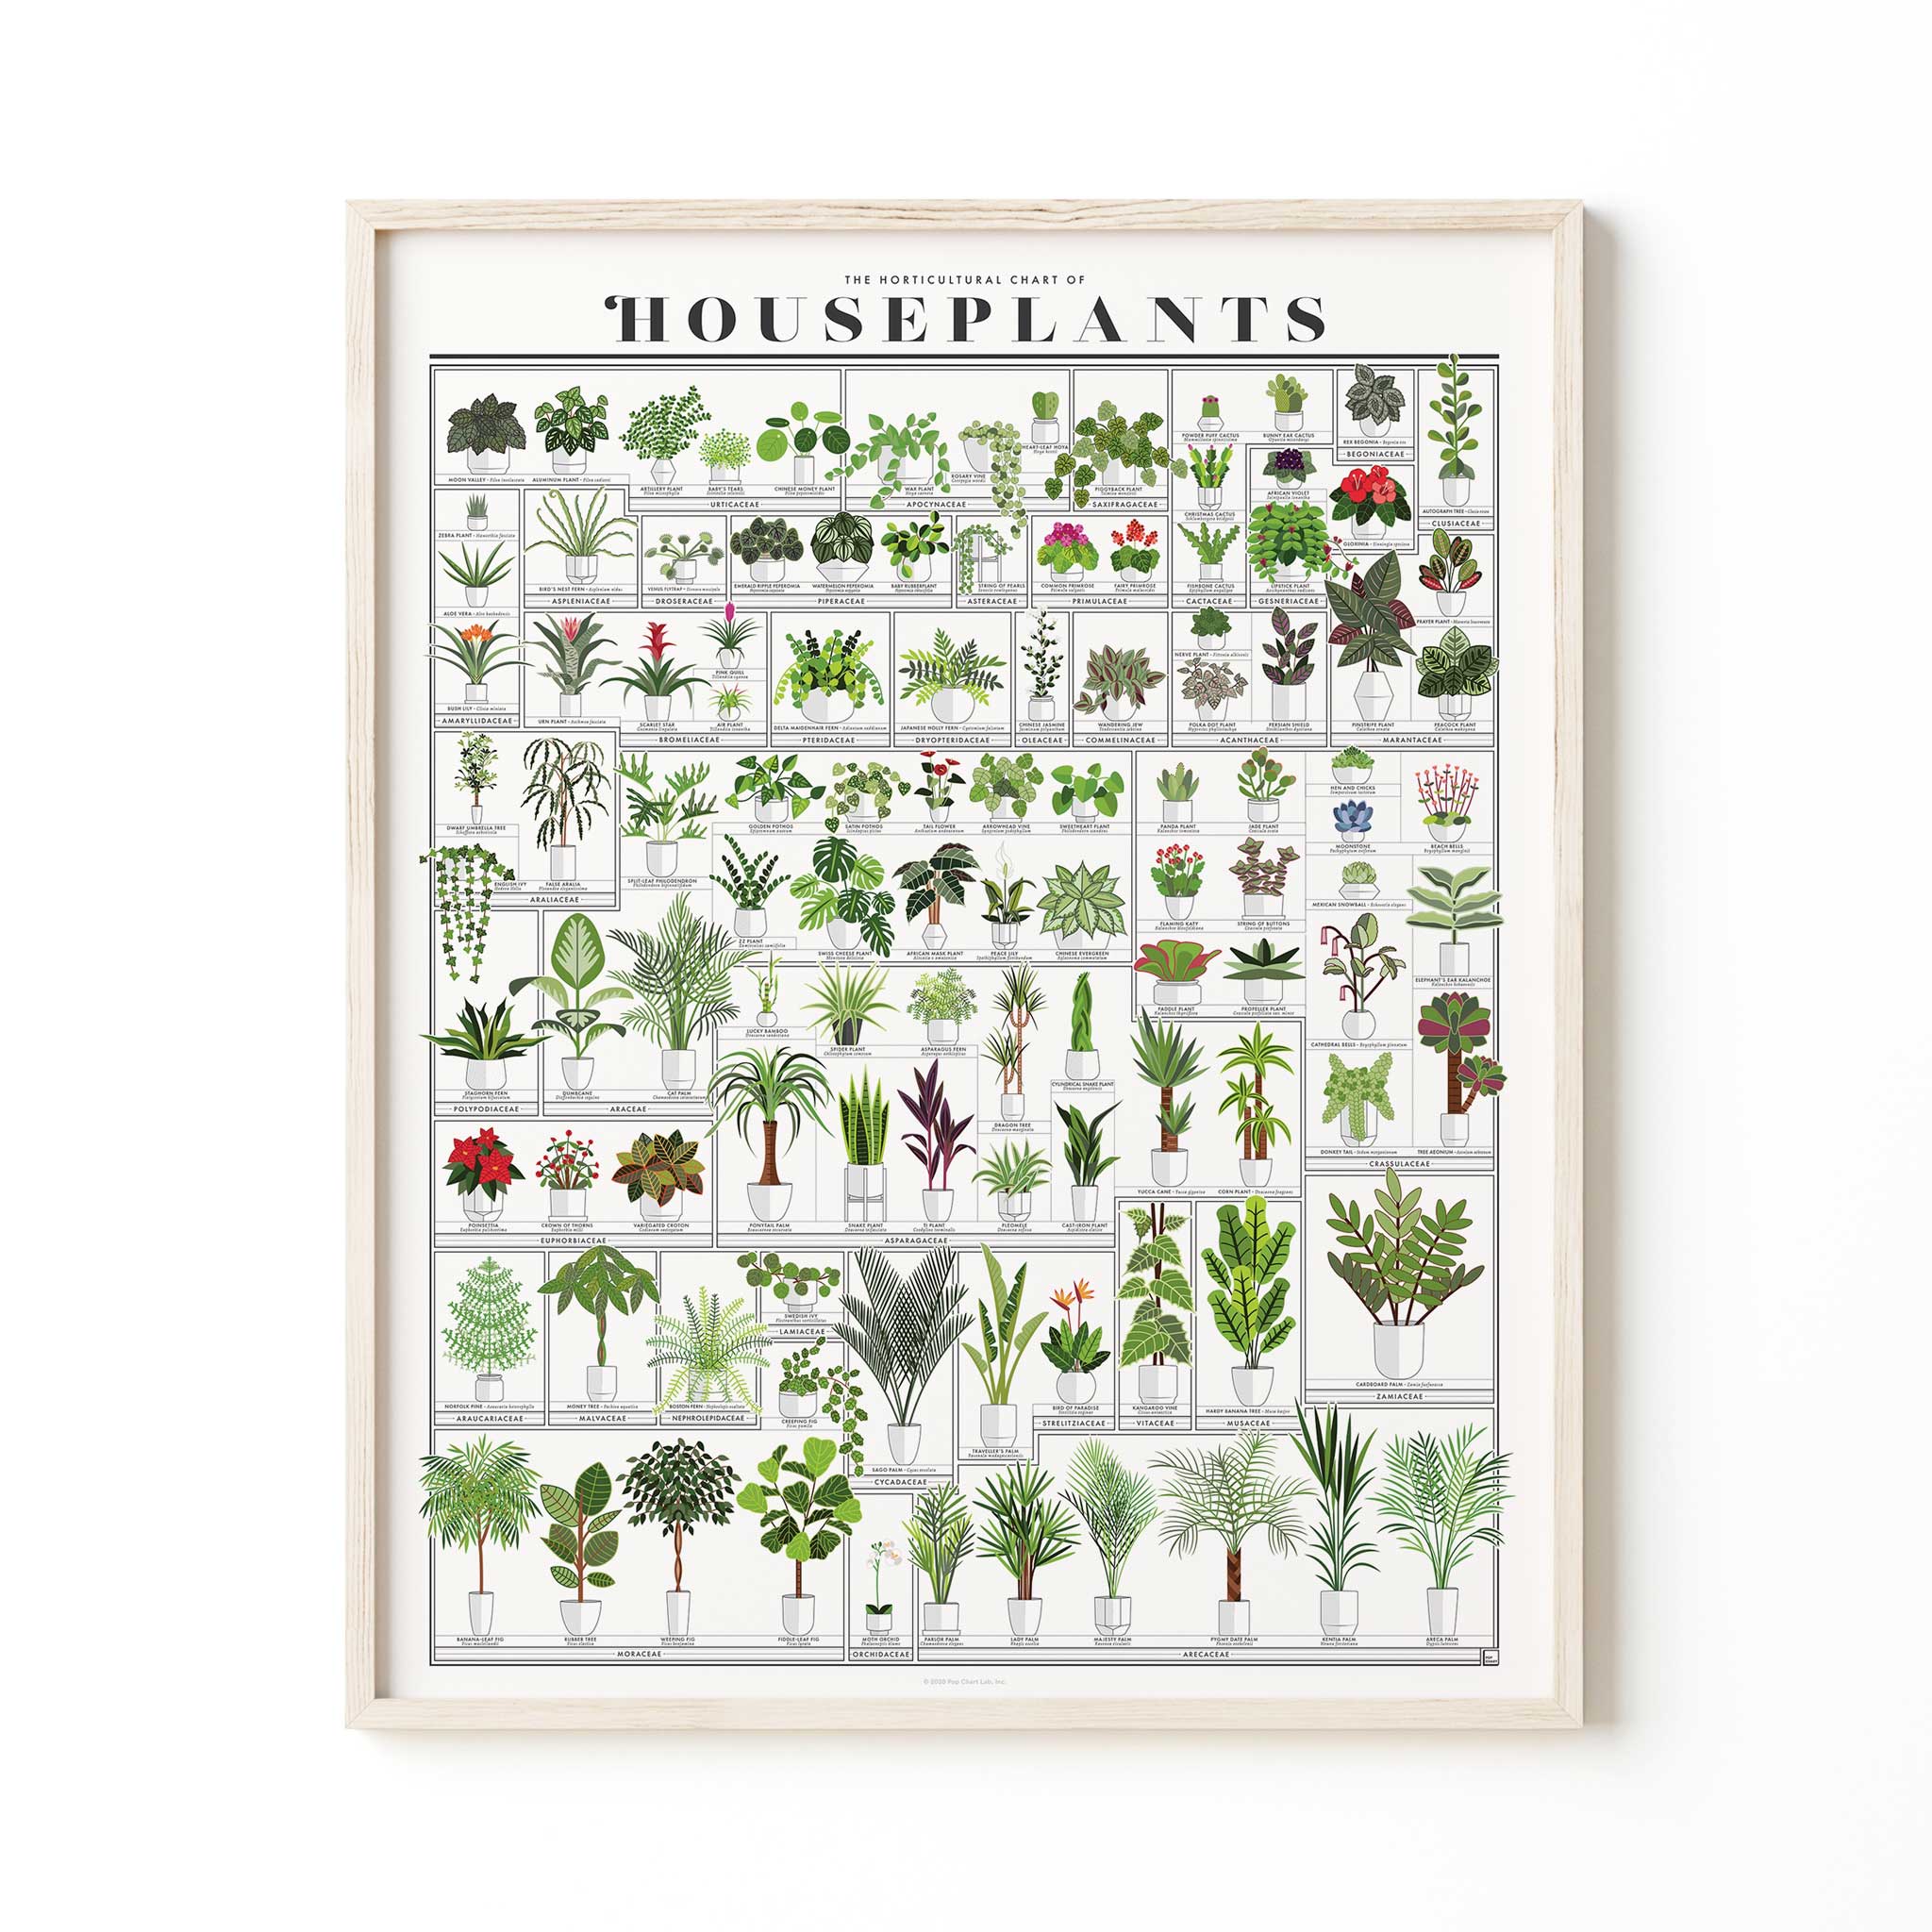 THE HORTICULTURAL CHART of HOUSEPLANTS | Infographic POSTER | 41x51 cm | Pop Chart